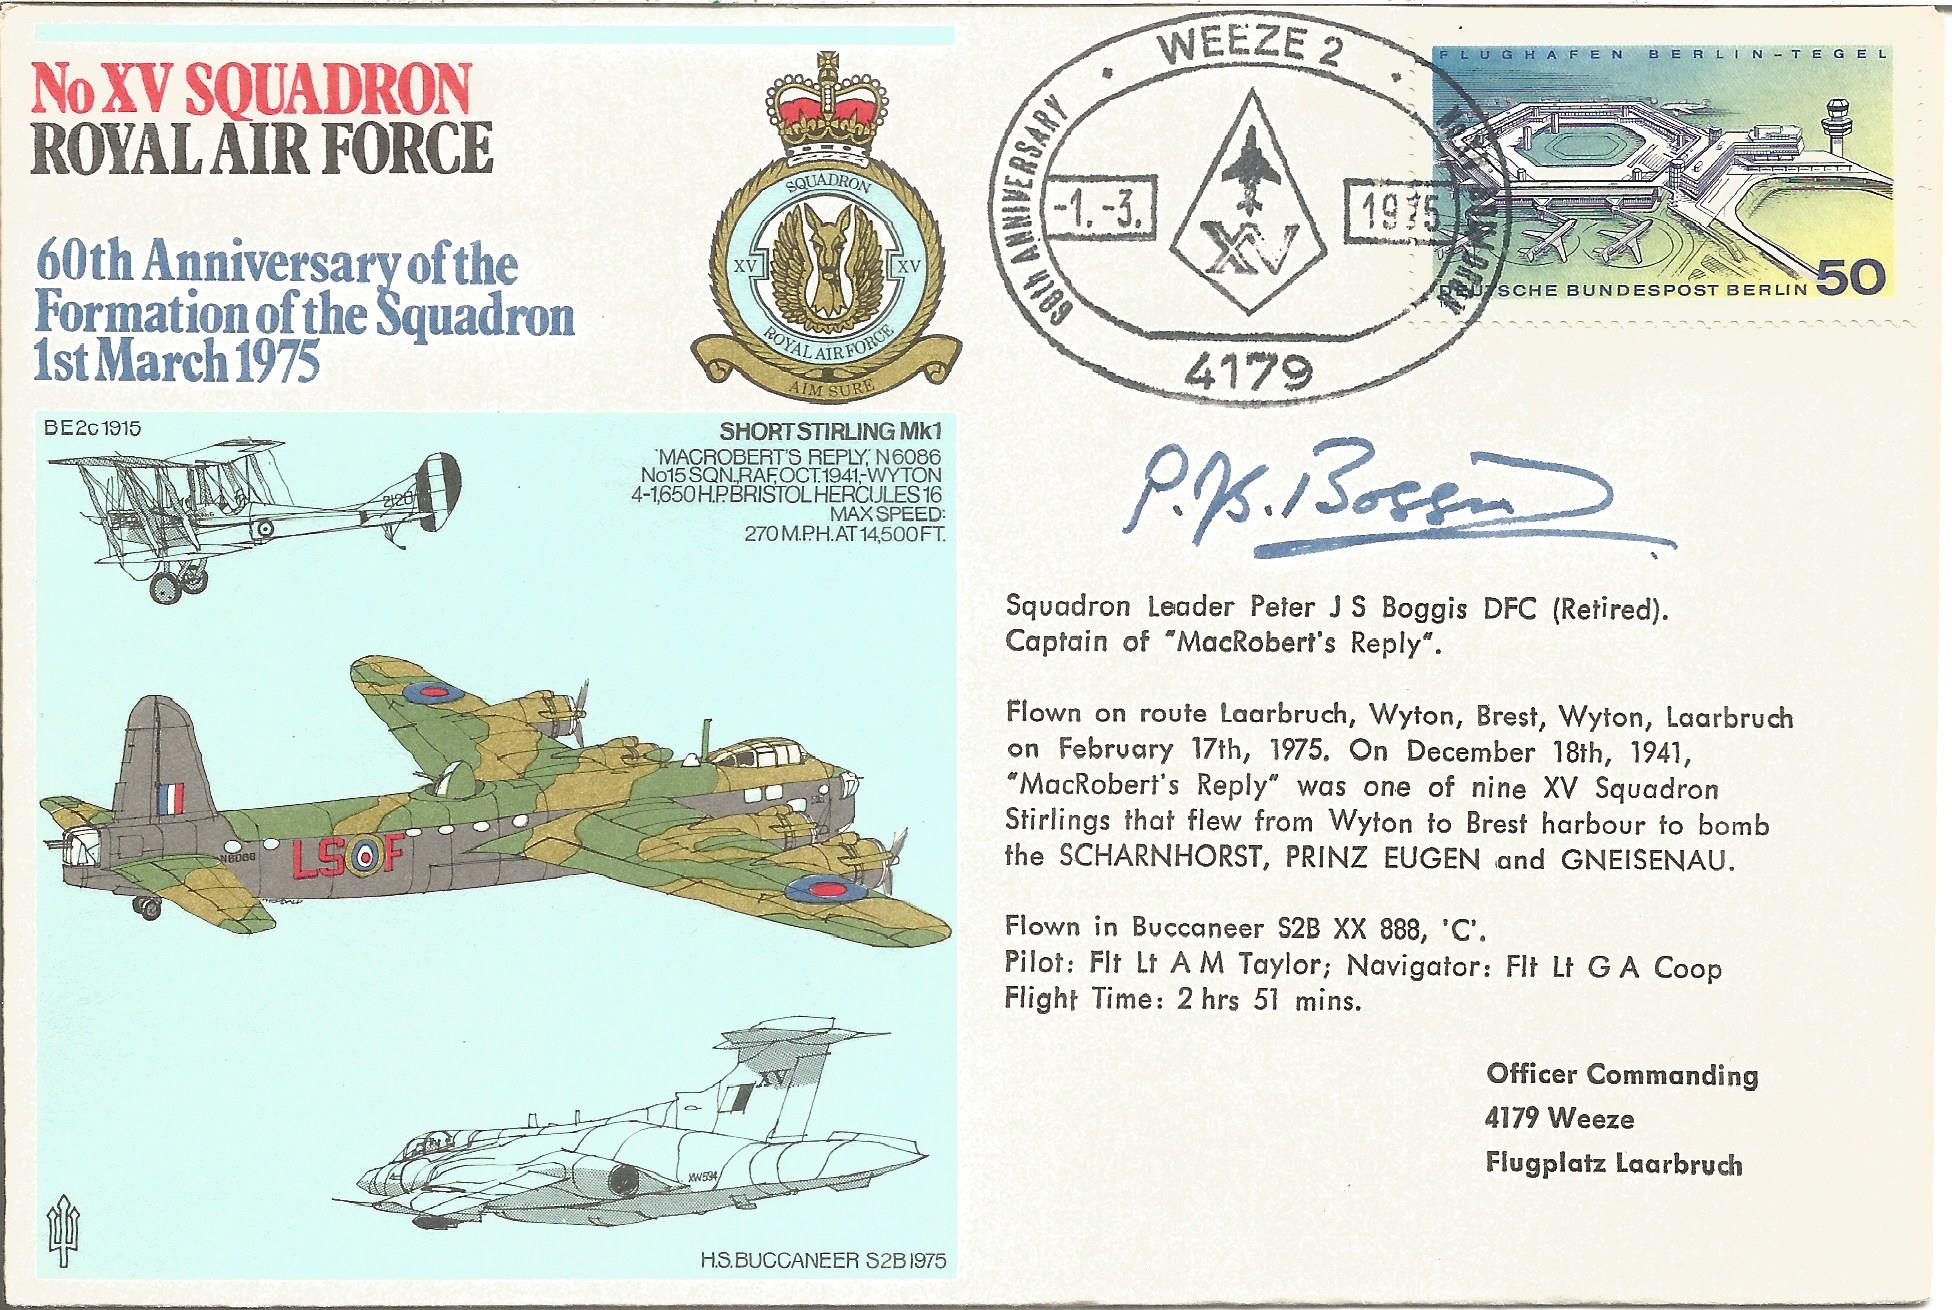 Squadron Leader Peter J. S. Boggis DFC signed No XV Squadron RAF 60th Anniversary of the Formation